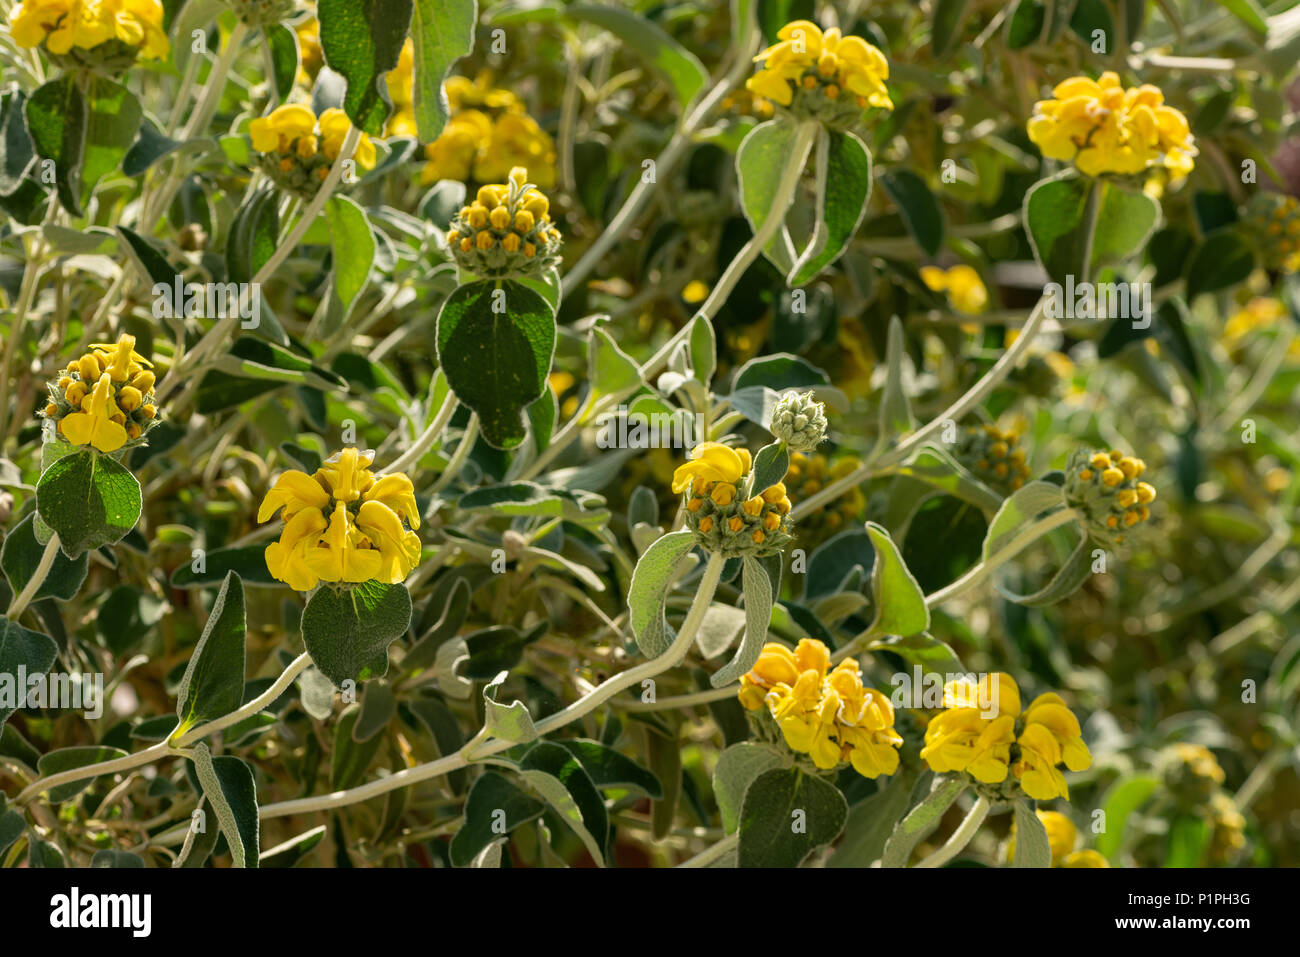 A Mediterranean shrub with bold grey leaves Jerusalem sage, Phlomis fruticosa, with hooded bright yellow flower heads on floral architectural stems Stock Photo